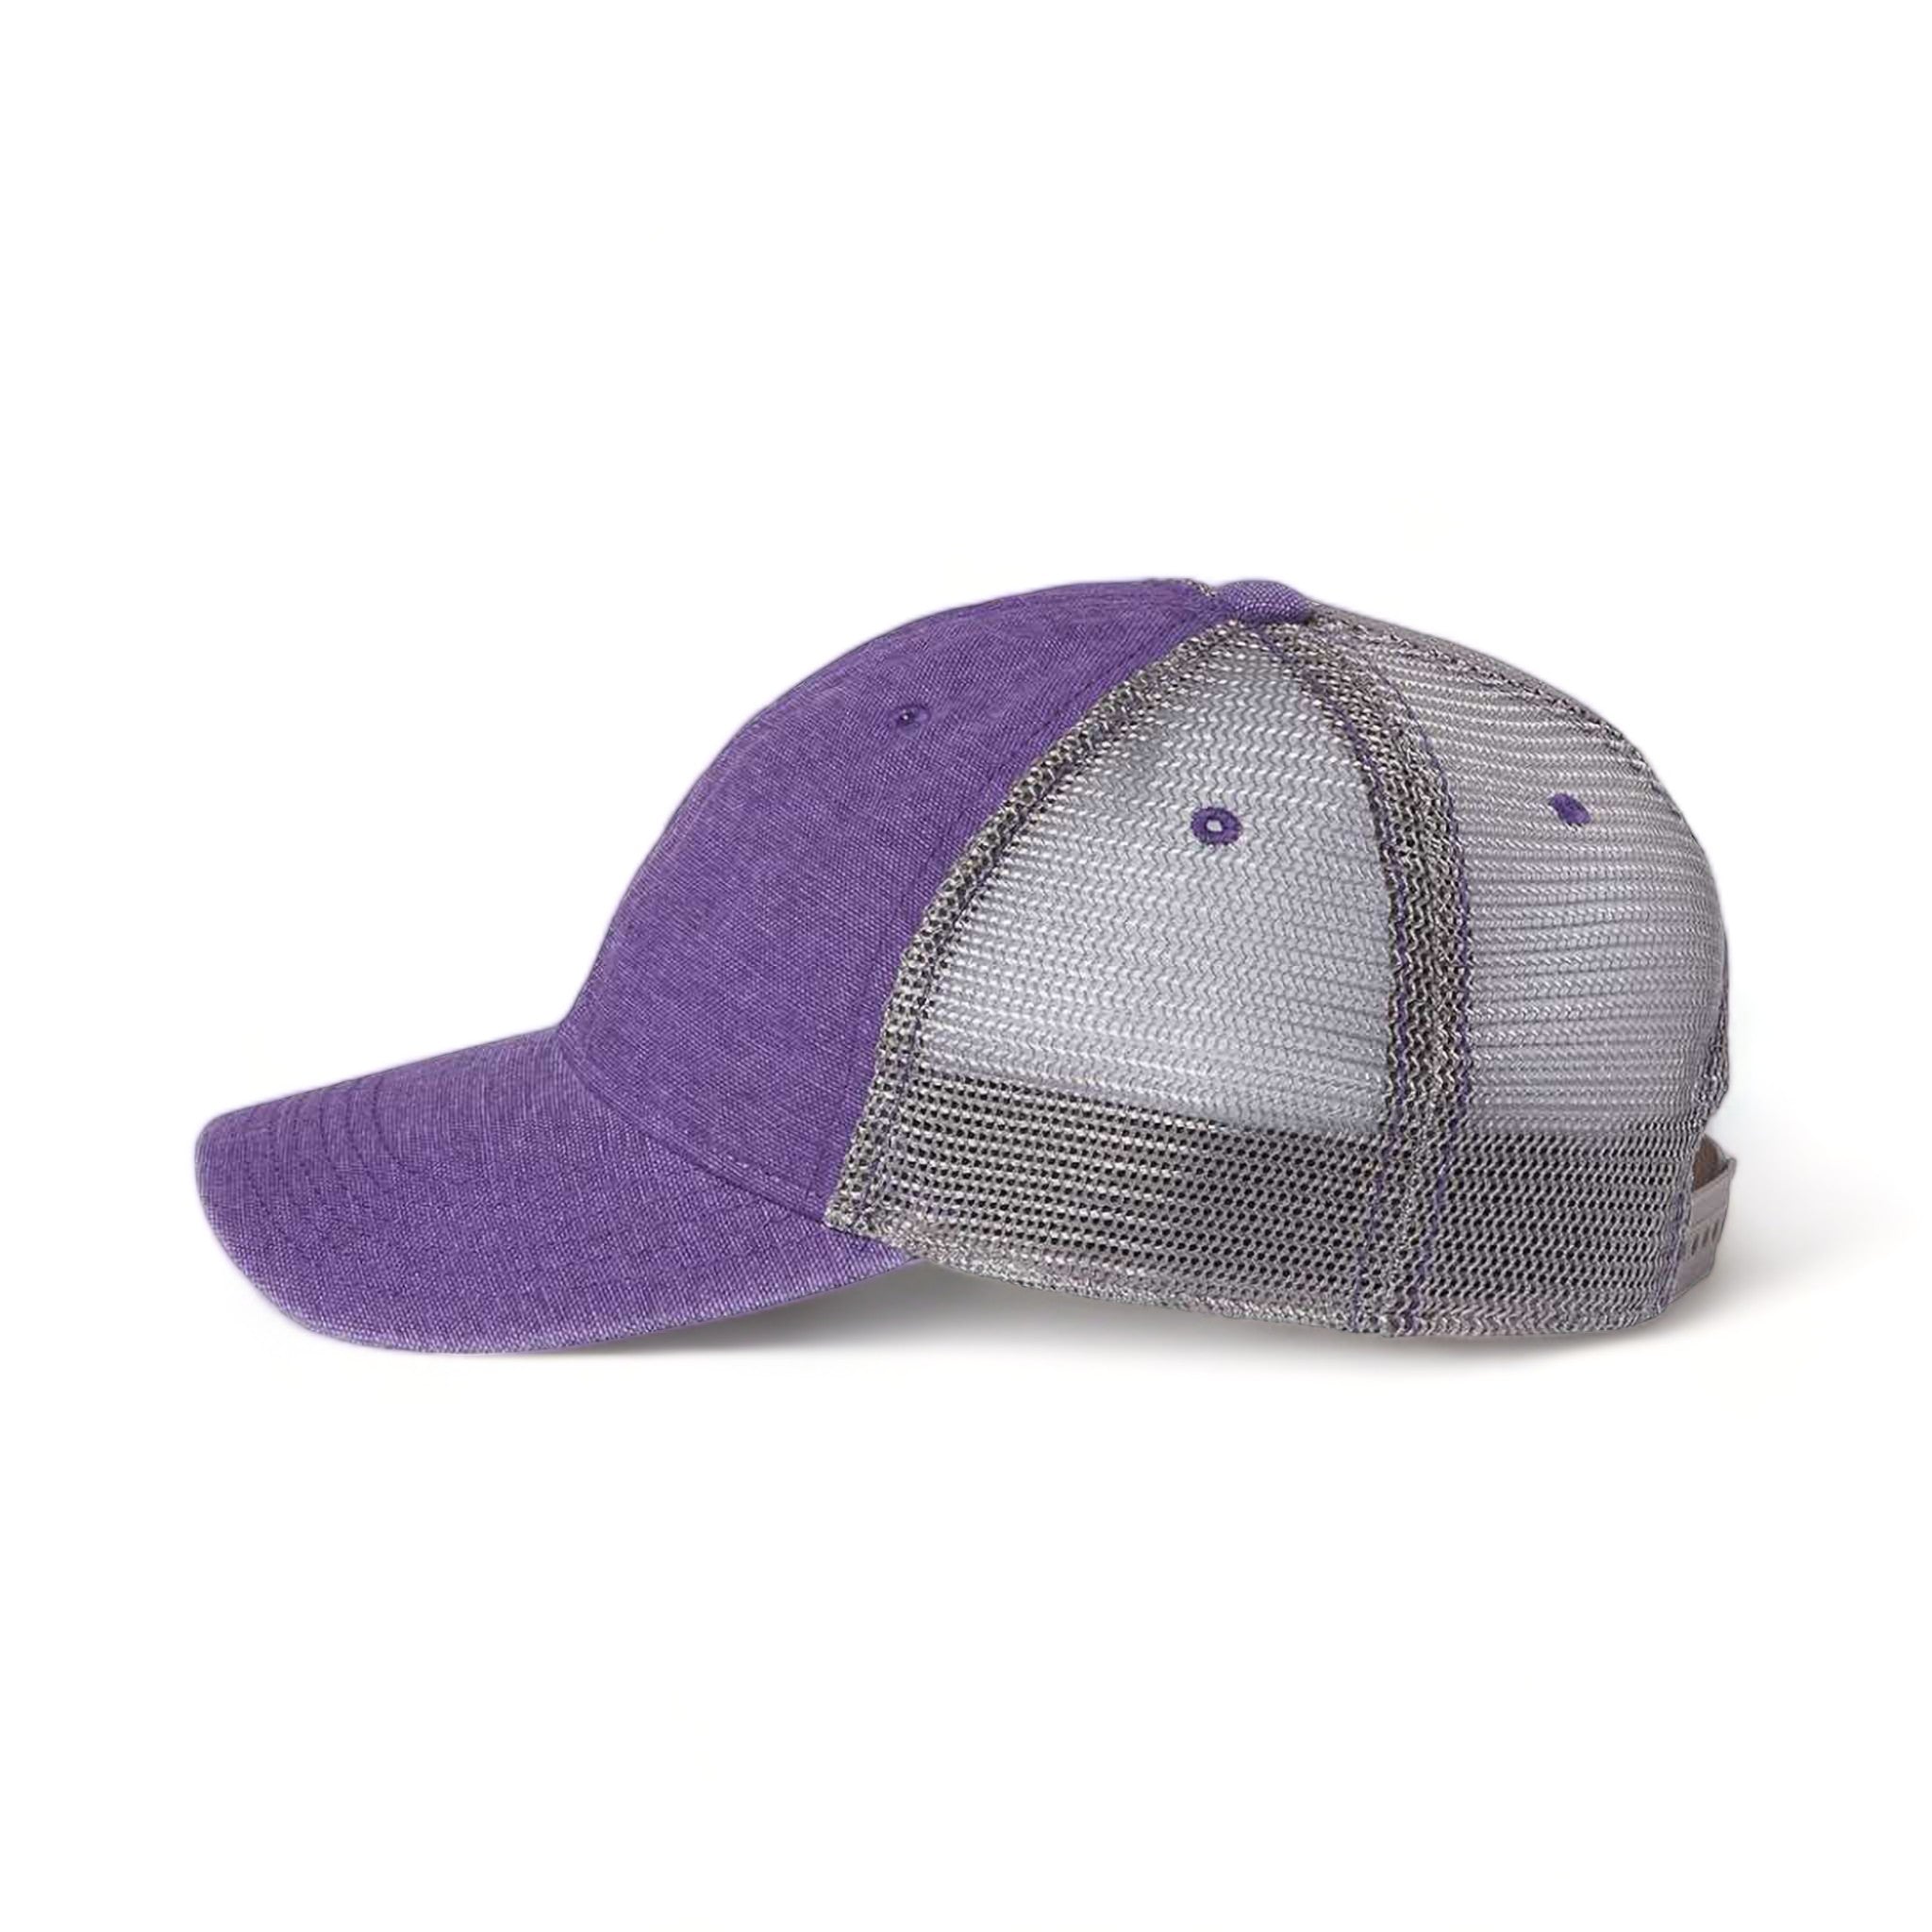 Side view of LEGACY DTA custom hat in purple and grey